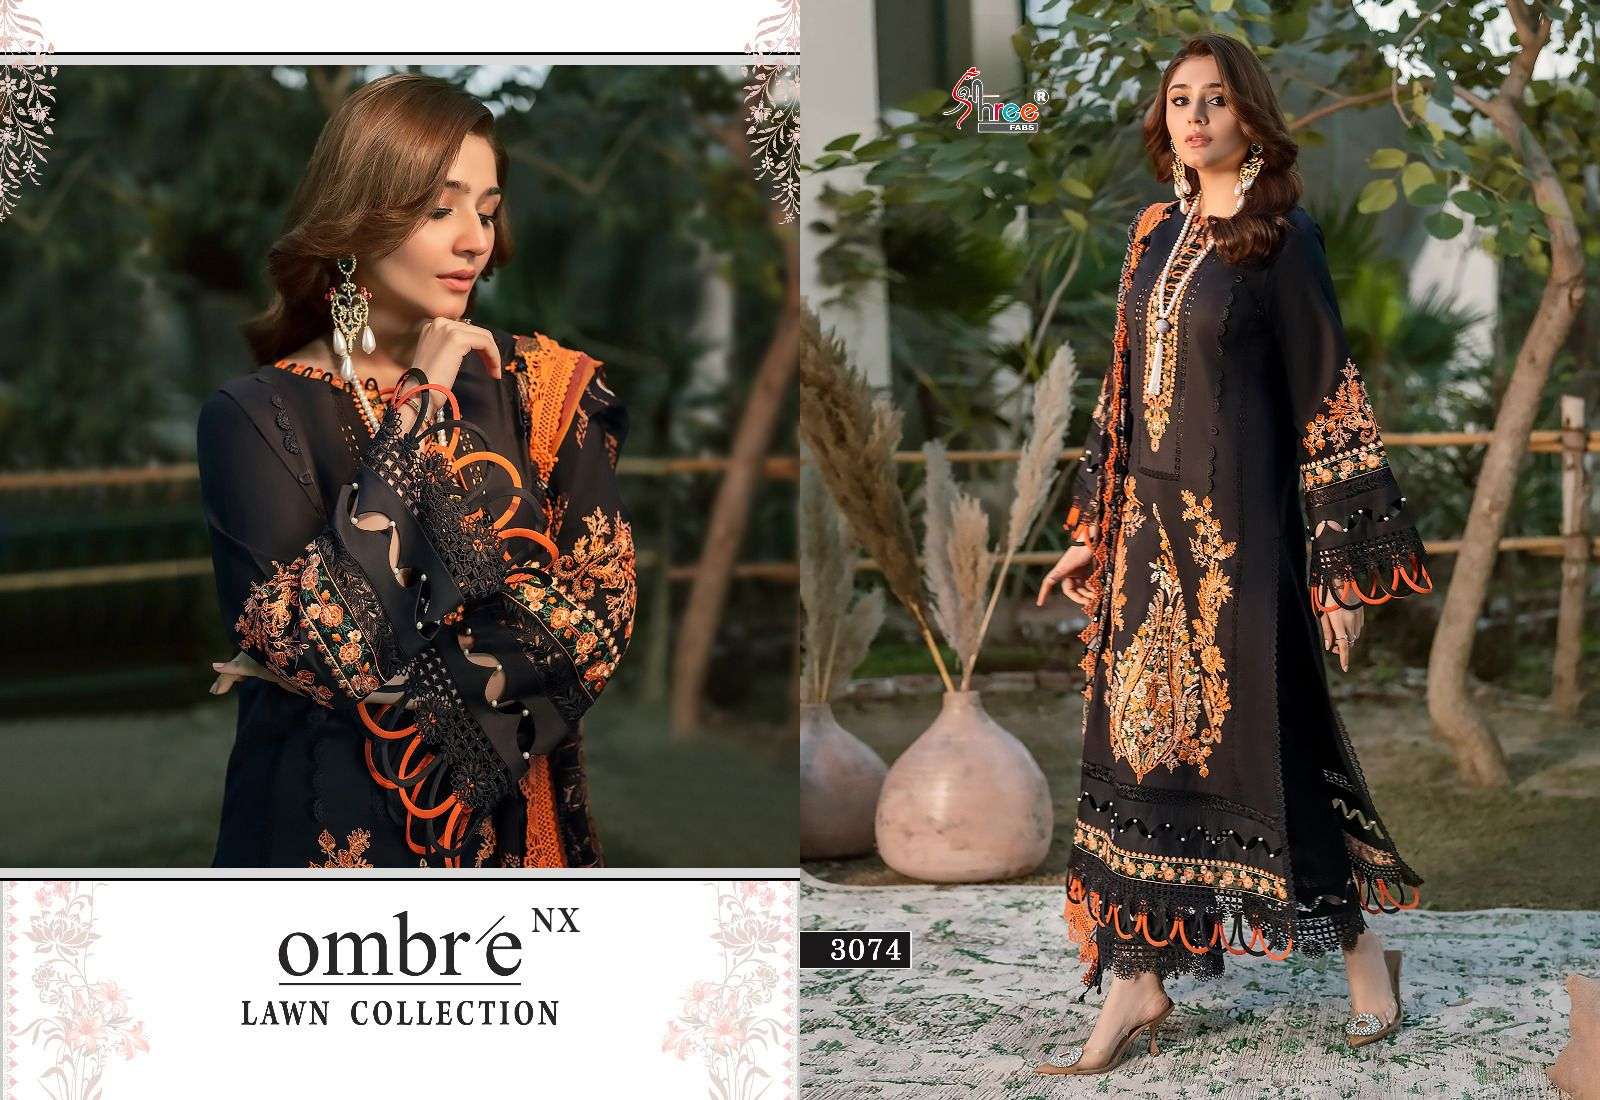 SHREE FABS OMBRE LAWN COLLECTION NX